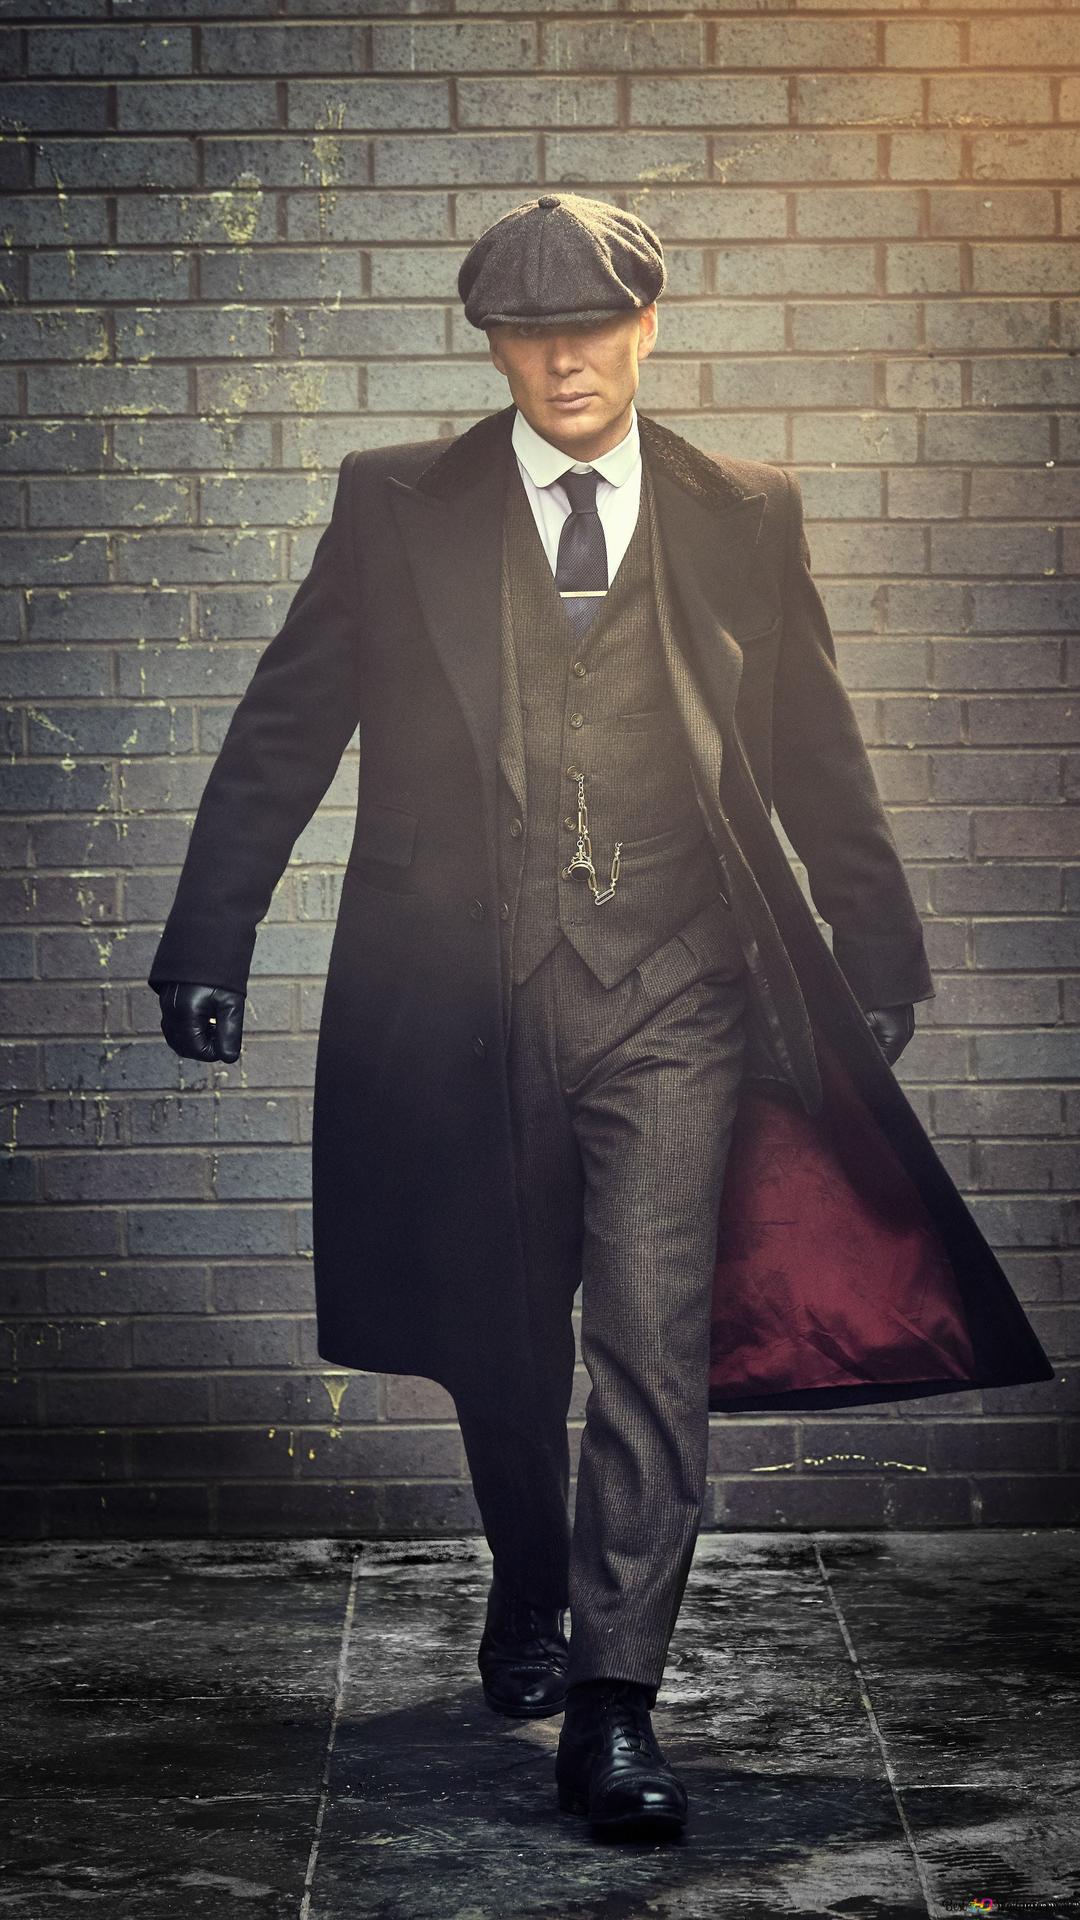 Portrait of peaky blinders tv series character with long overcoat and suit in front of wall 2K wallpaper download